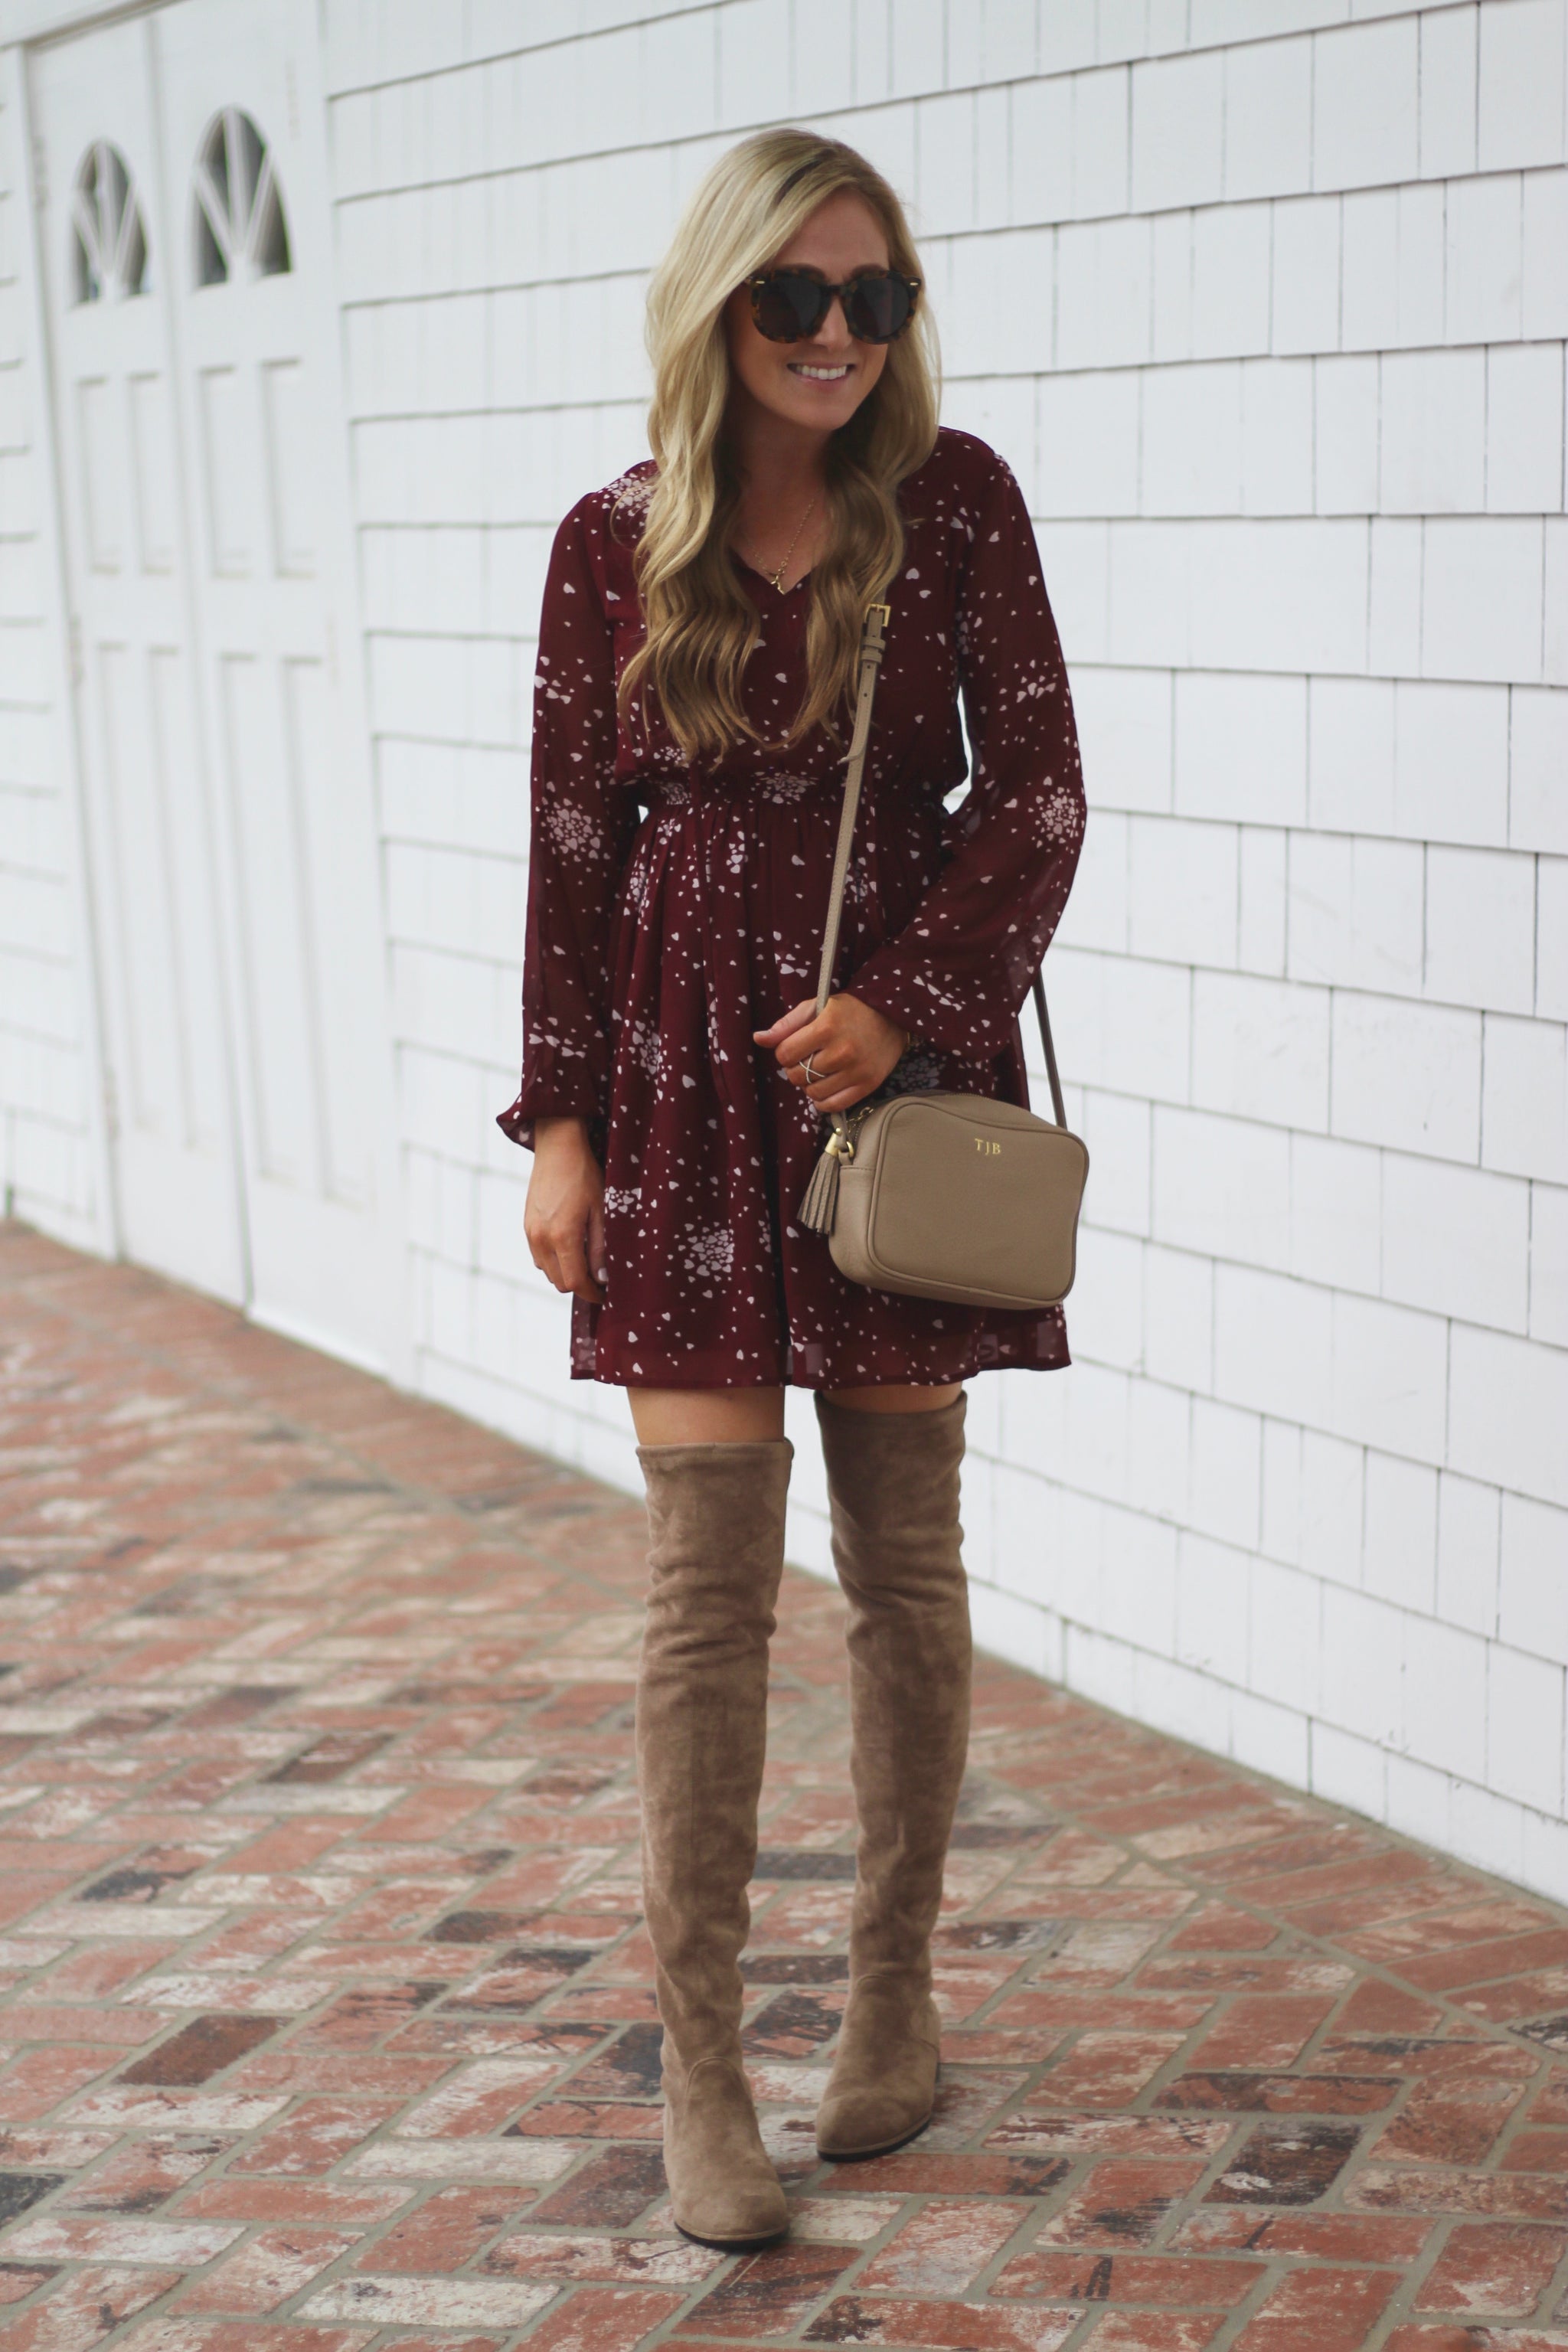 the Knee High Boots - Kaitlyn Pan Shoes